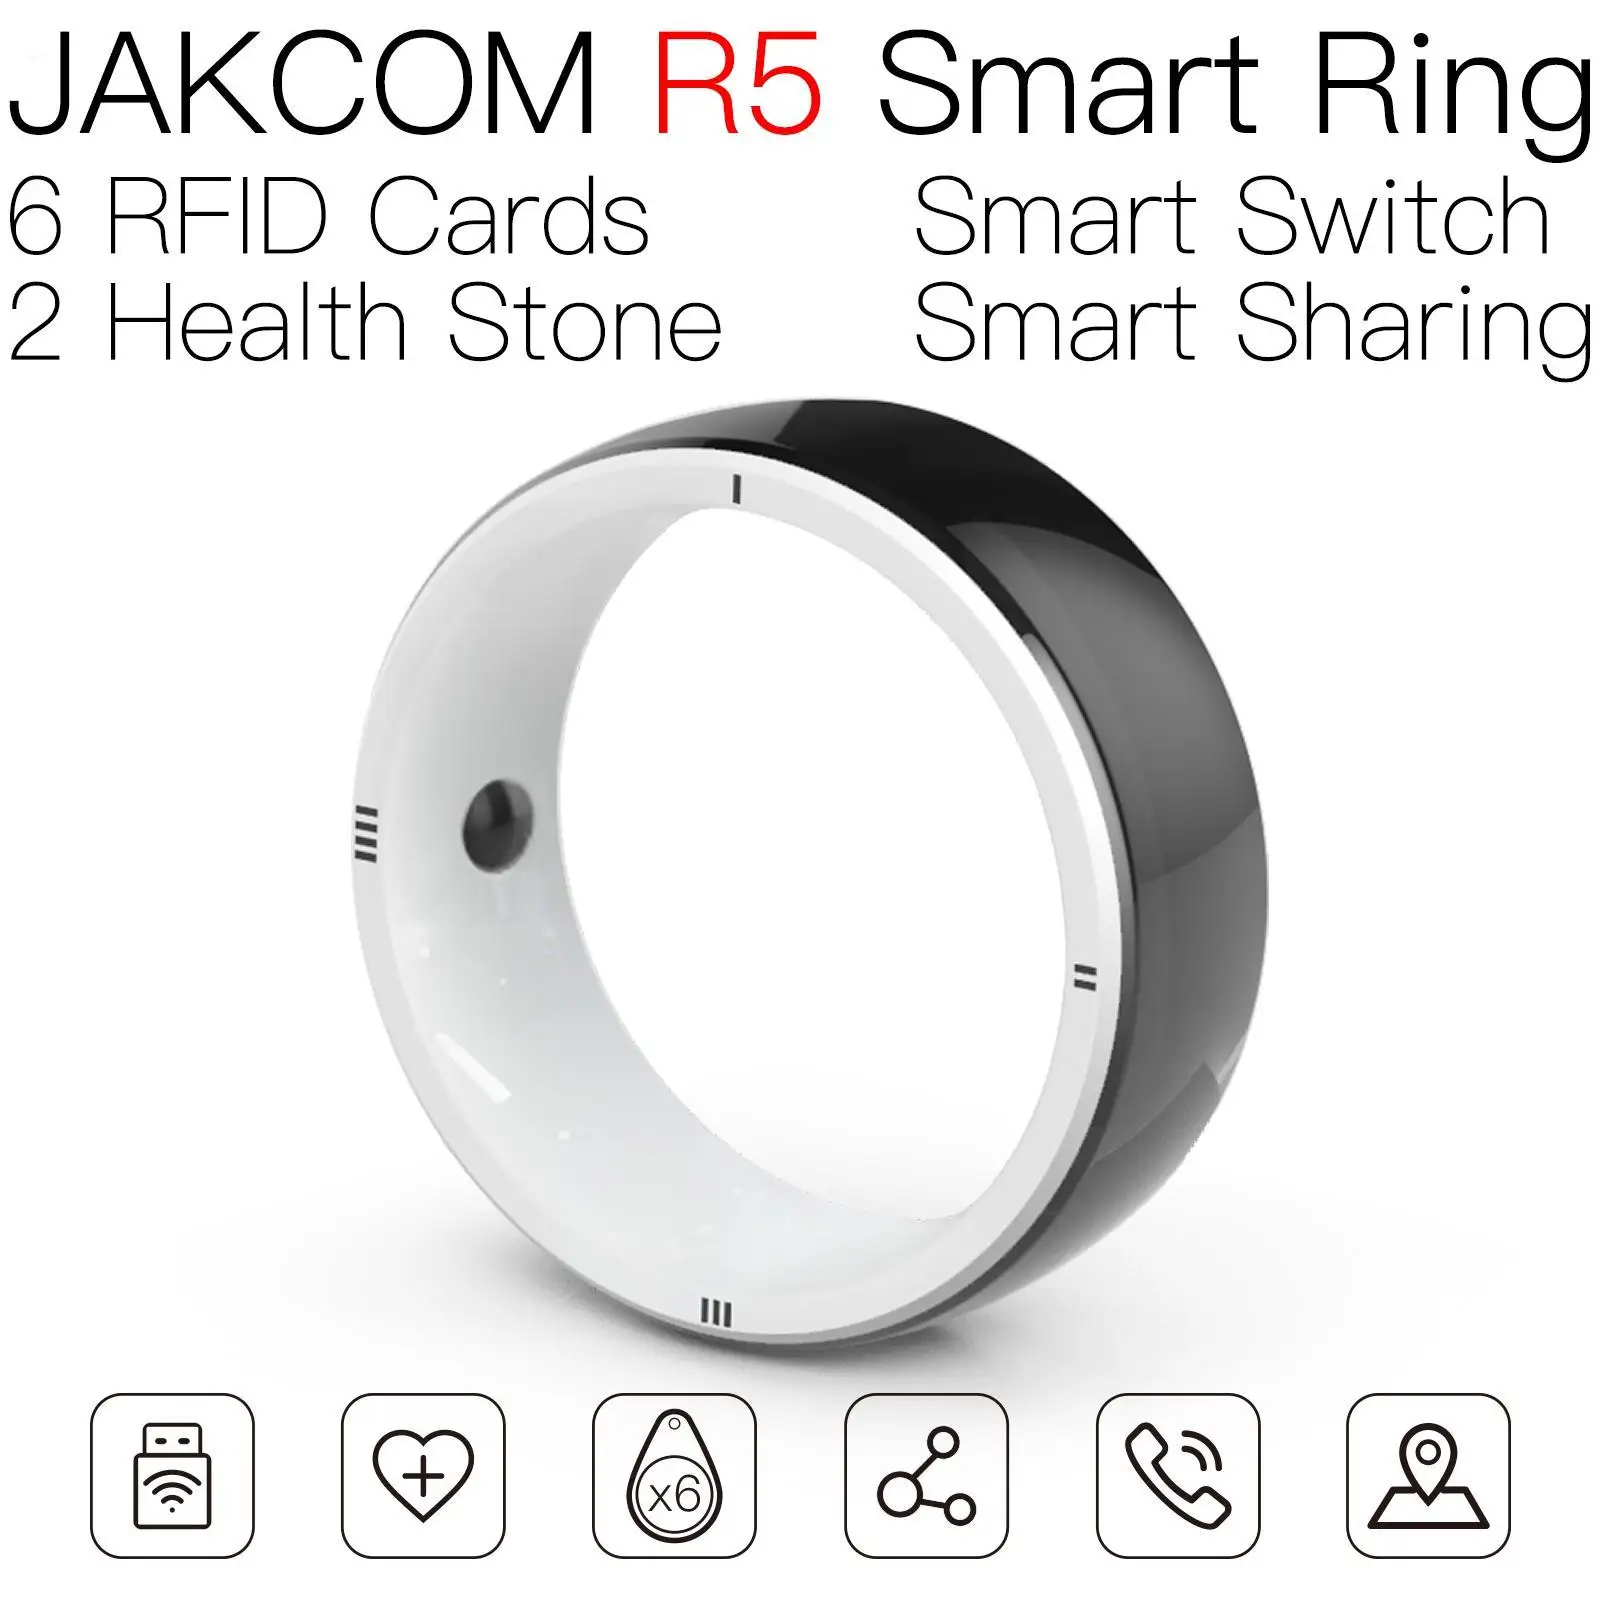 

JAKCOM R5 Smart Ring Nice than carte pec no chip rfid protection cable label tie nfc sticker card metal waterproof tags